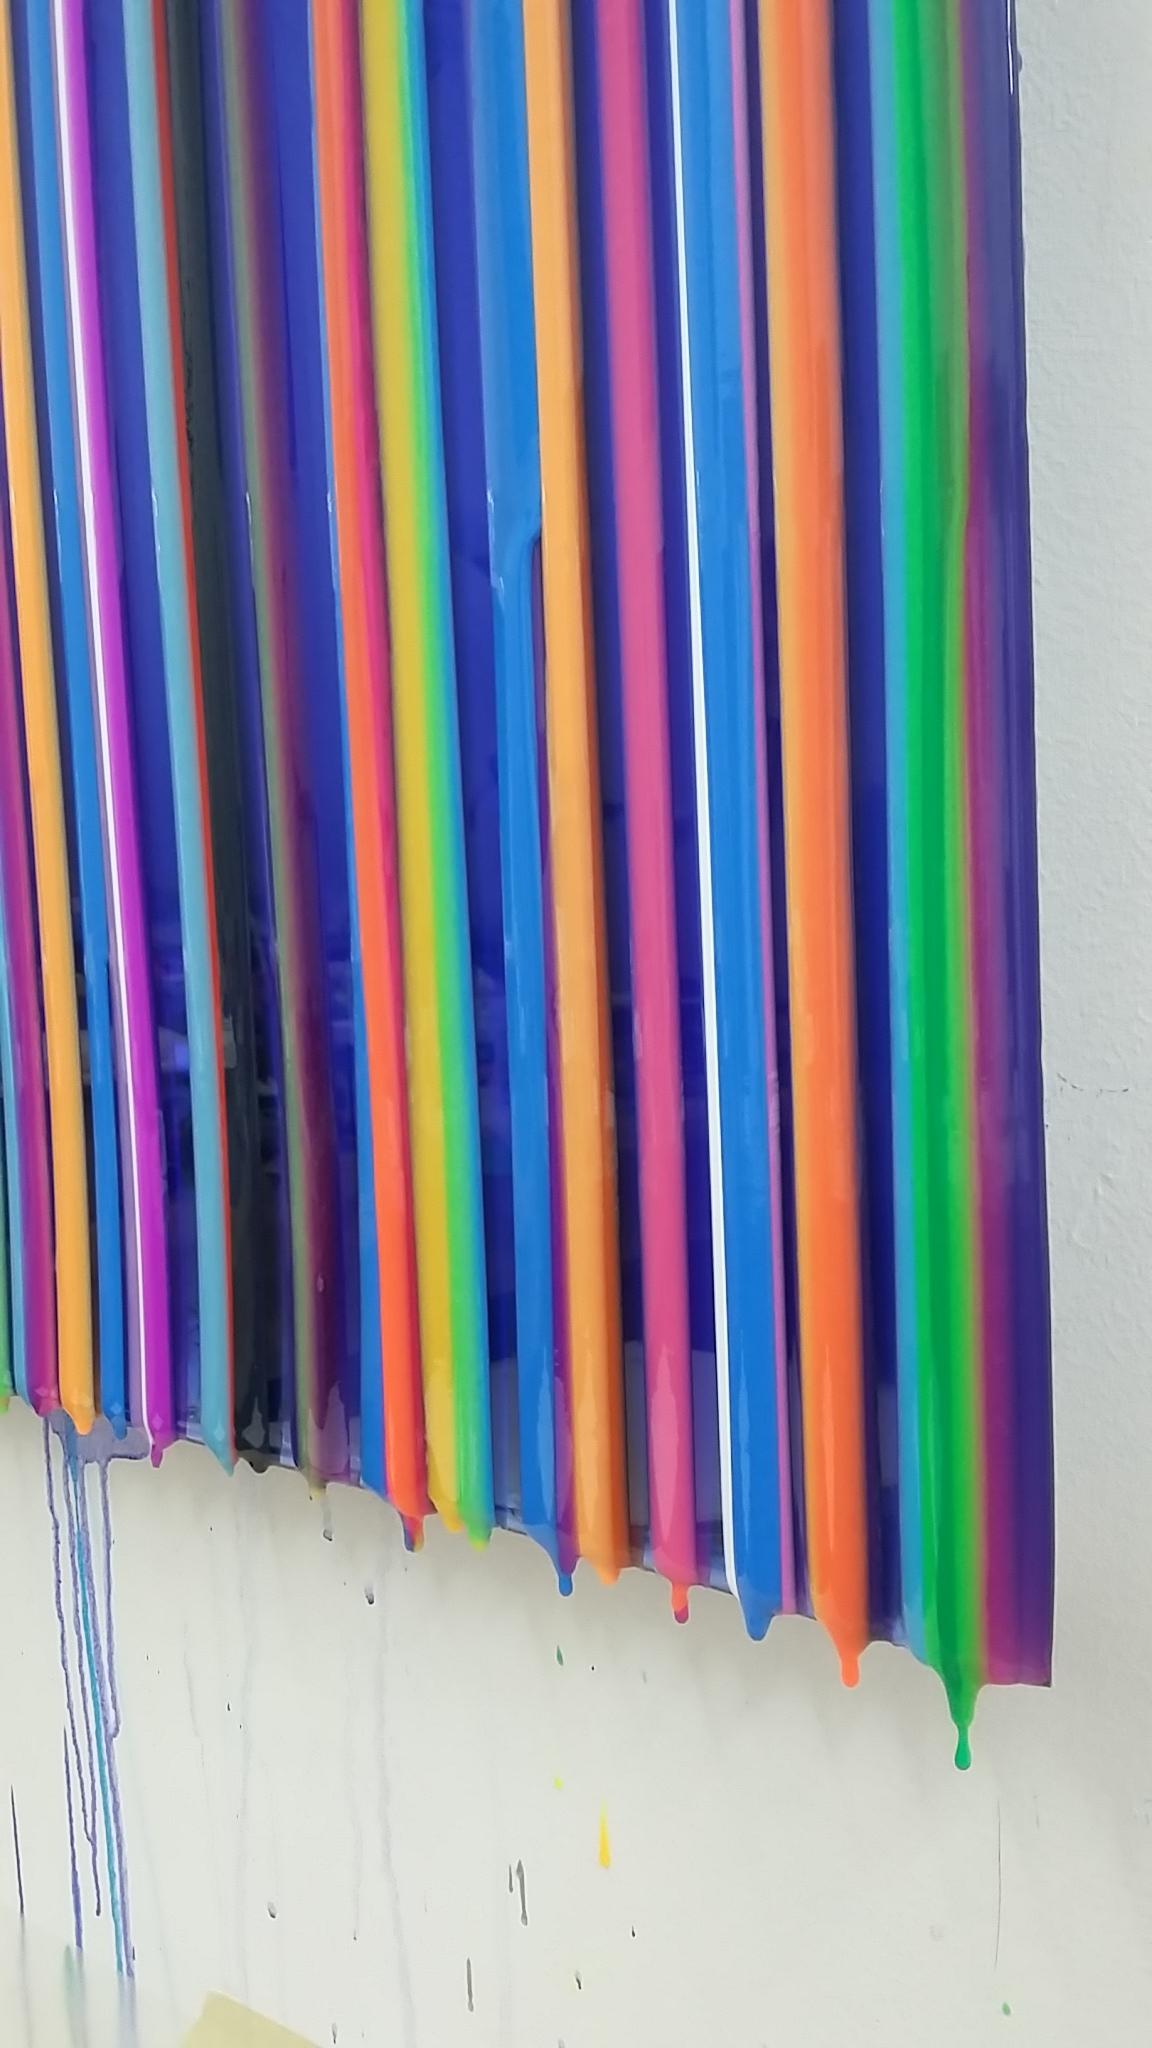 Choi’s striped colorful work has a beautiful highly glossed surface.
This work is very organic.  Surfaces drip and extend outwards.
Finding inspiration from the physical and metaphysical qualities of water, Cathy Choi paints with pigmented resin,